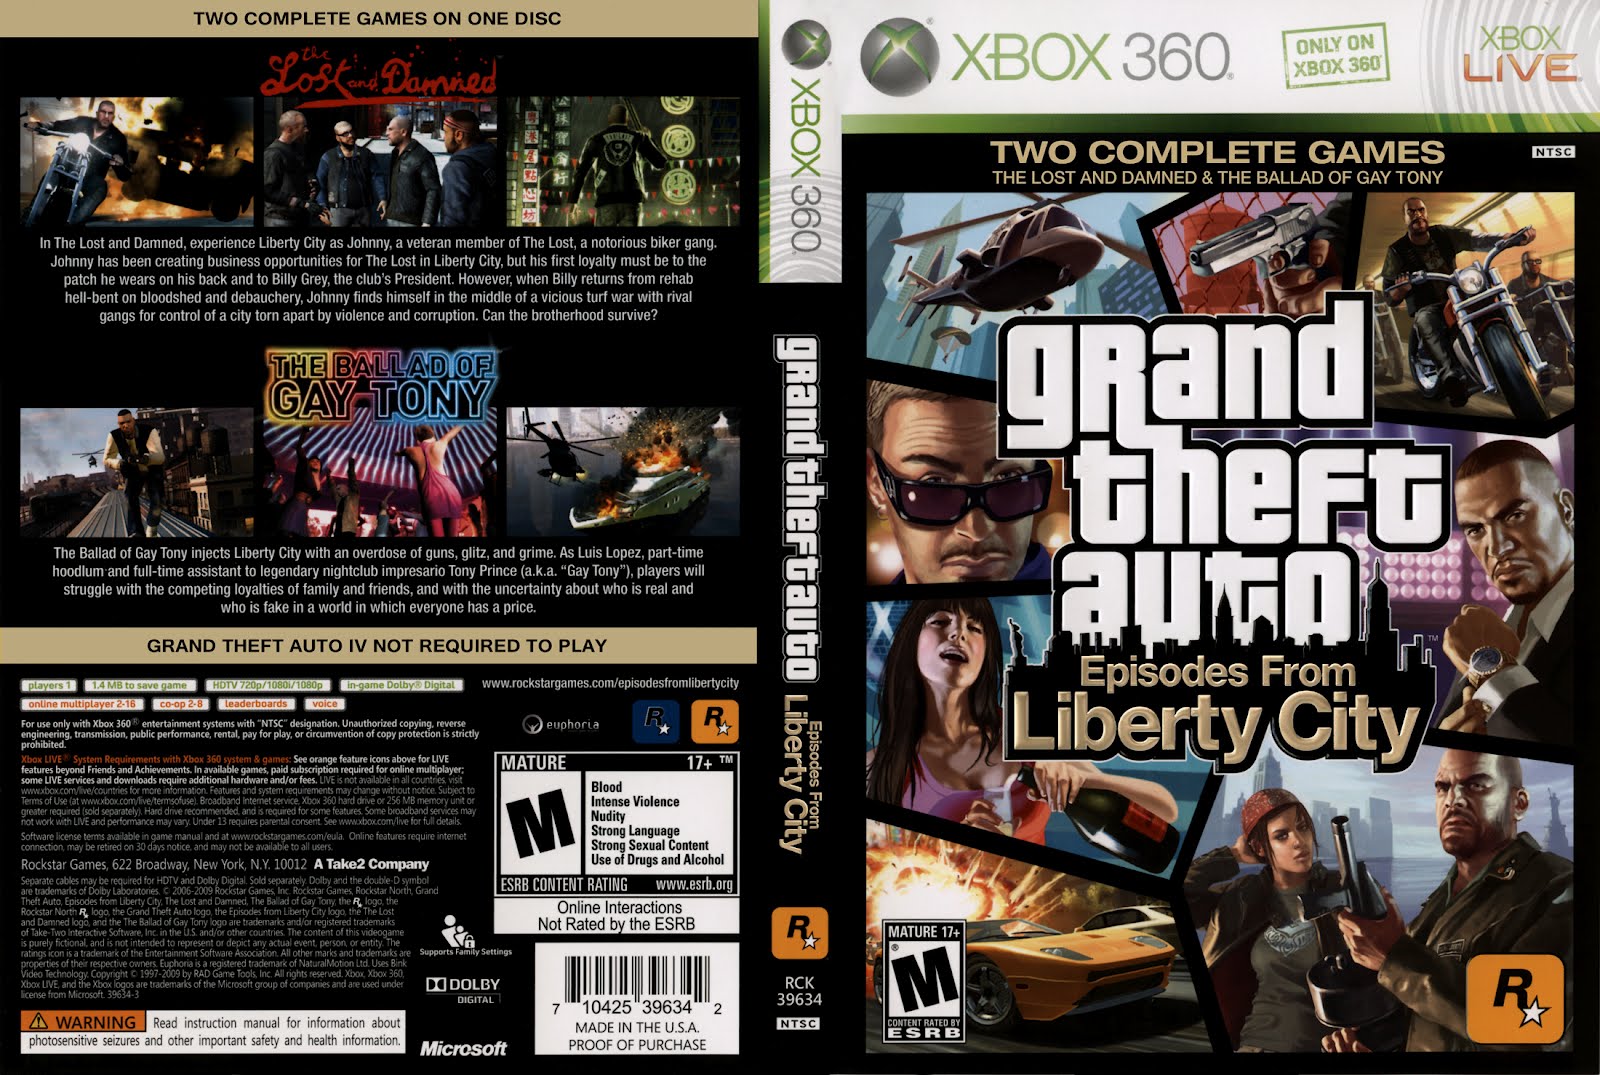 gta episodes from liberty city xbox 360 torrent